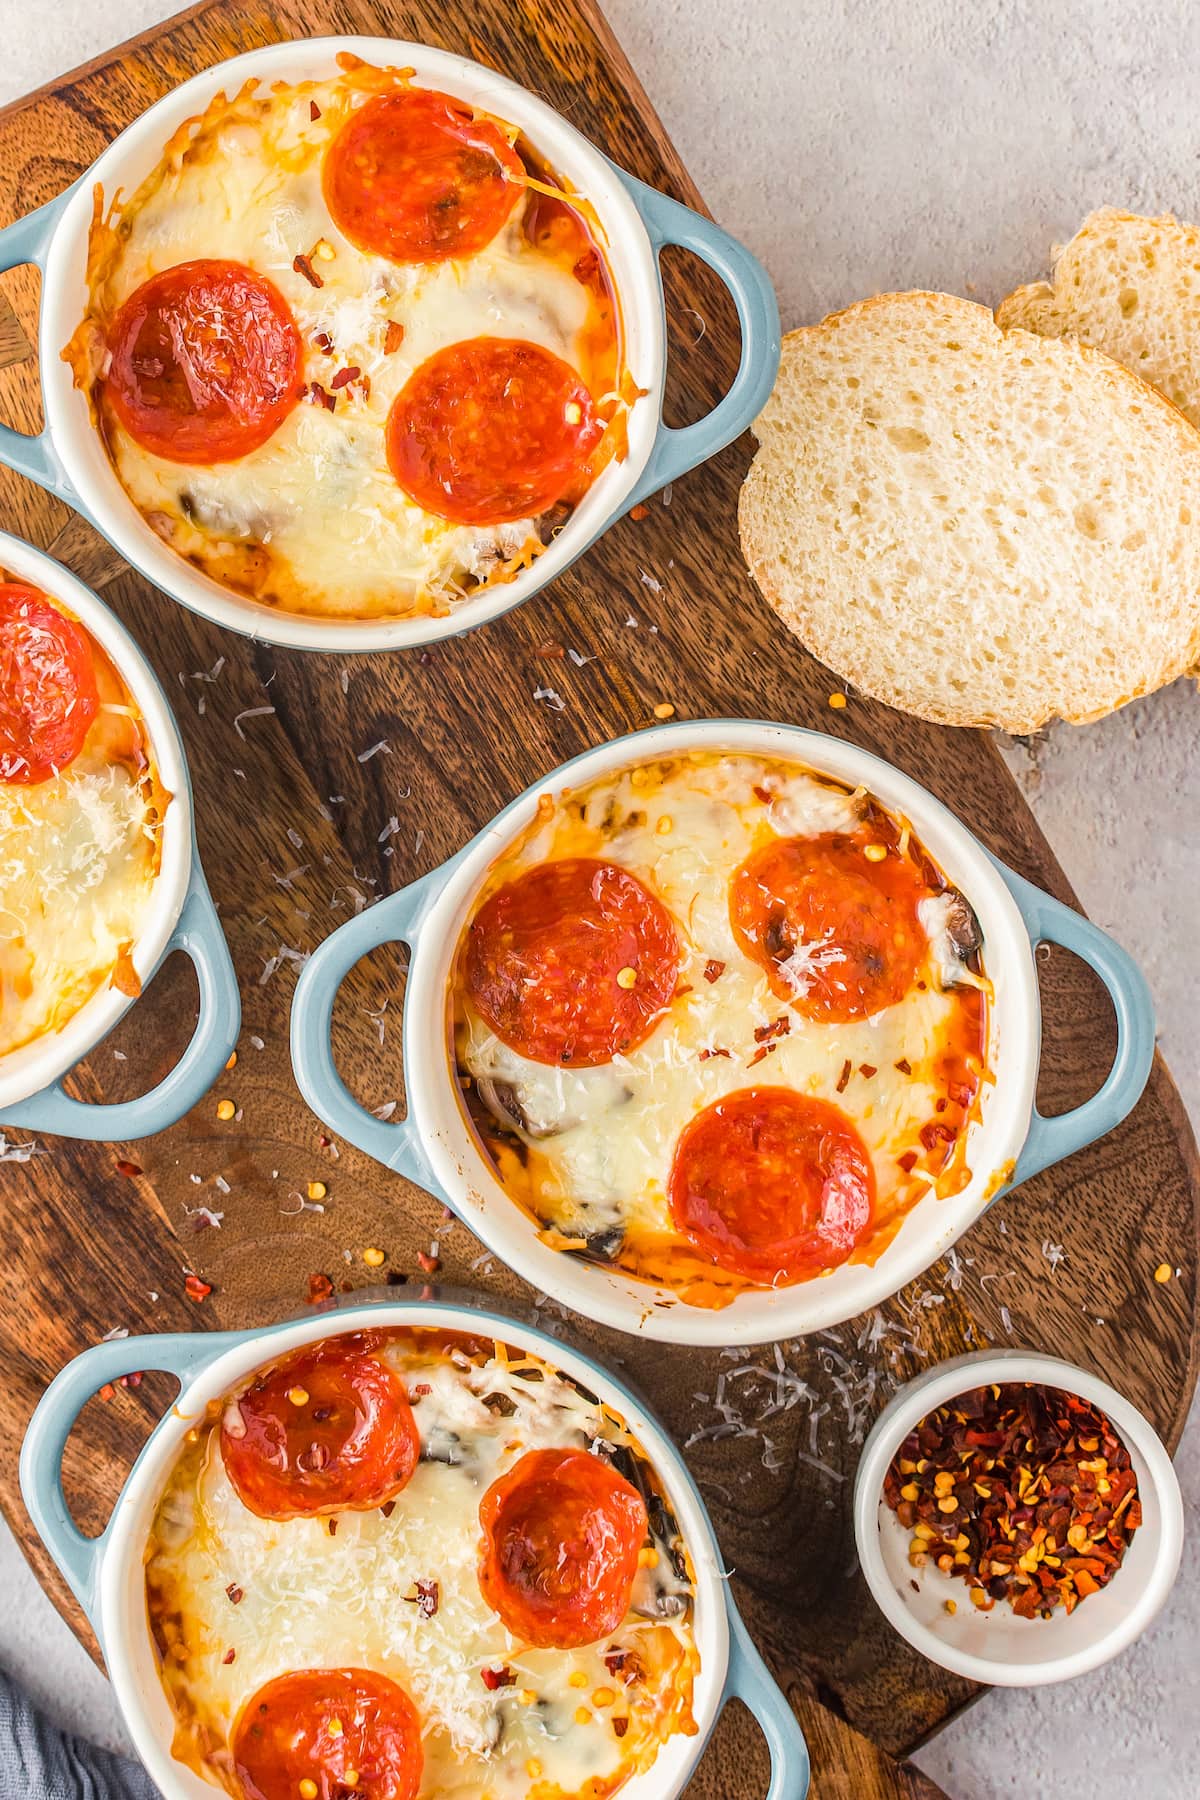 Pizza bowls on a serving board with small bowls of parmesan and red pepper flakes.